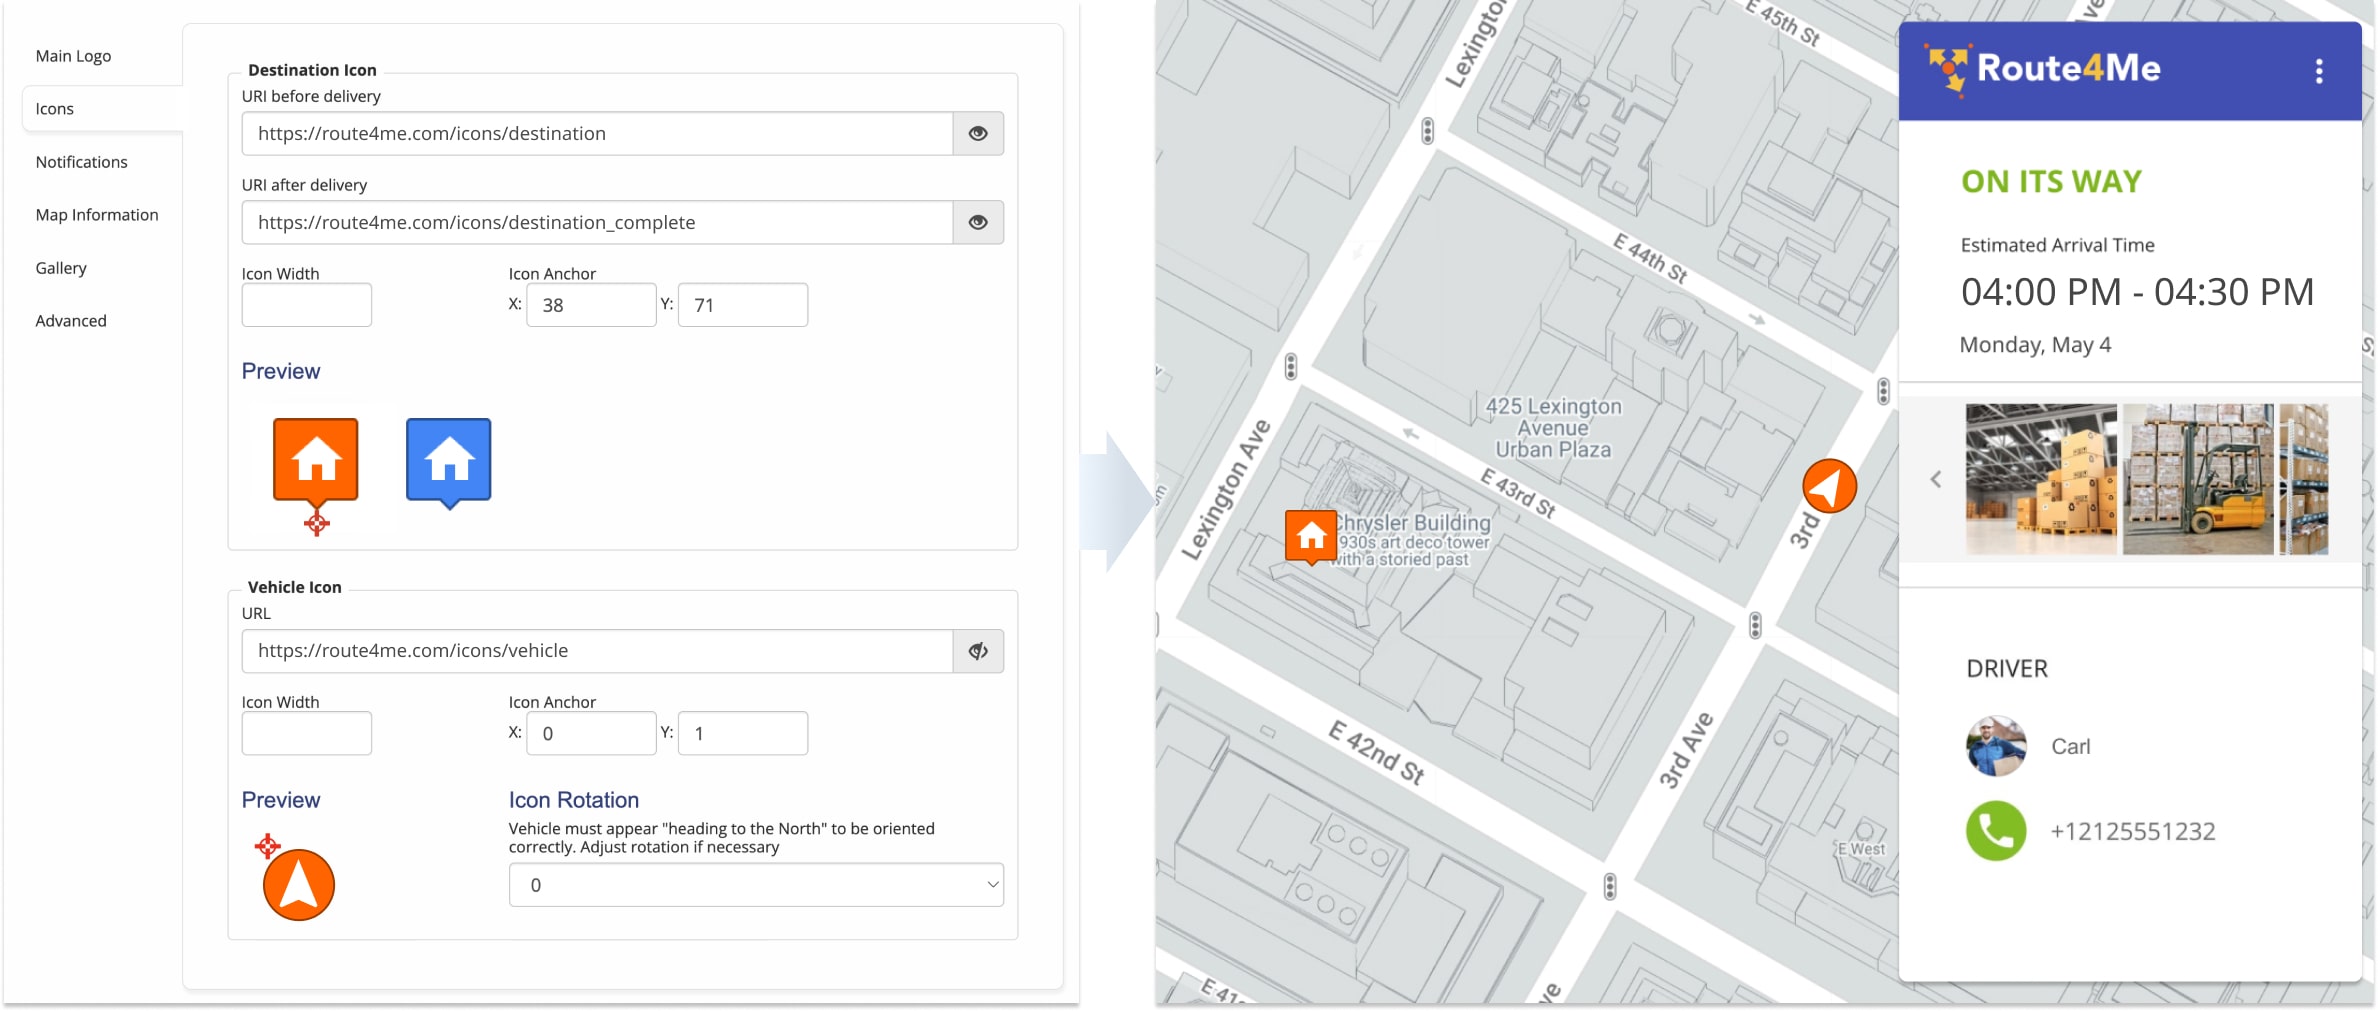 Customers can see their location and driver's live location on the Online Order Tracking Map.